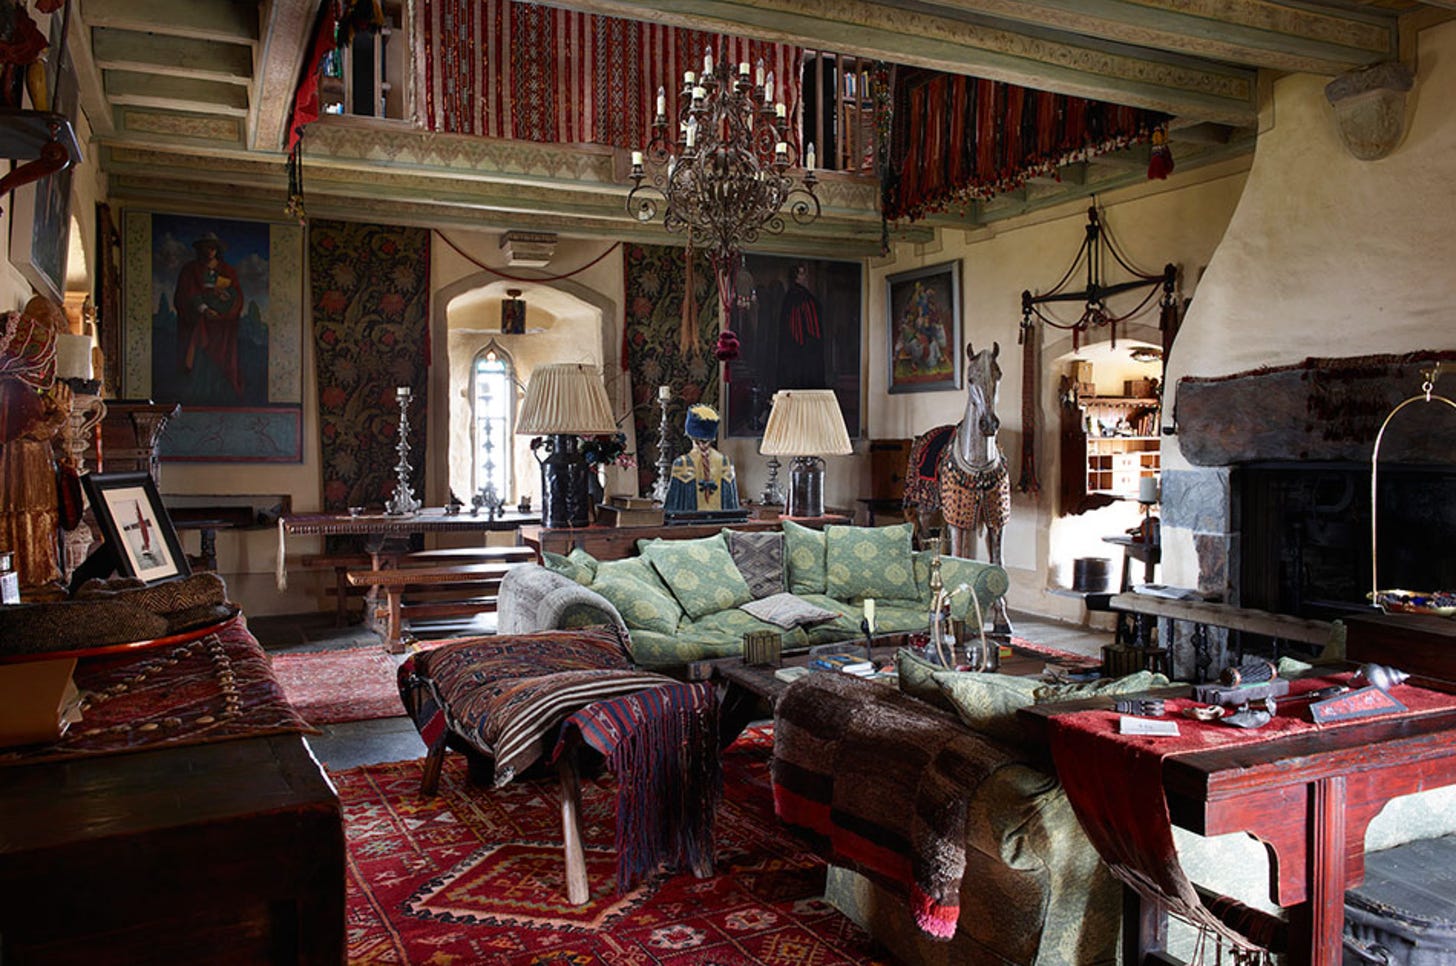 The living room of Jeremy Irons castle, with life sized wooden horse.